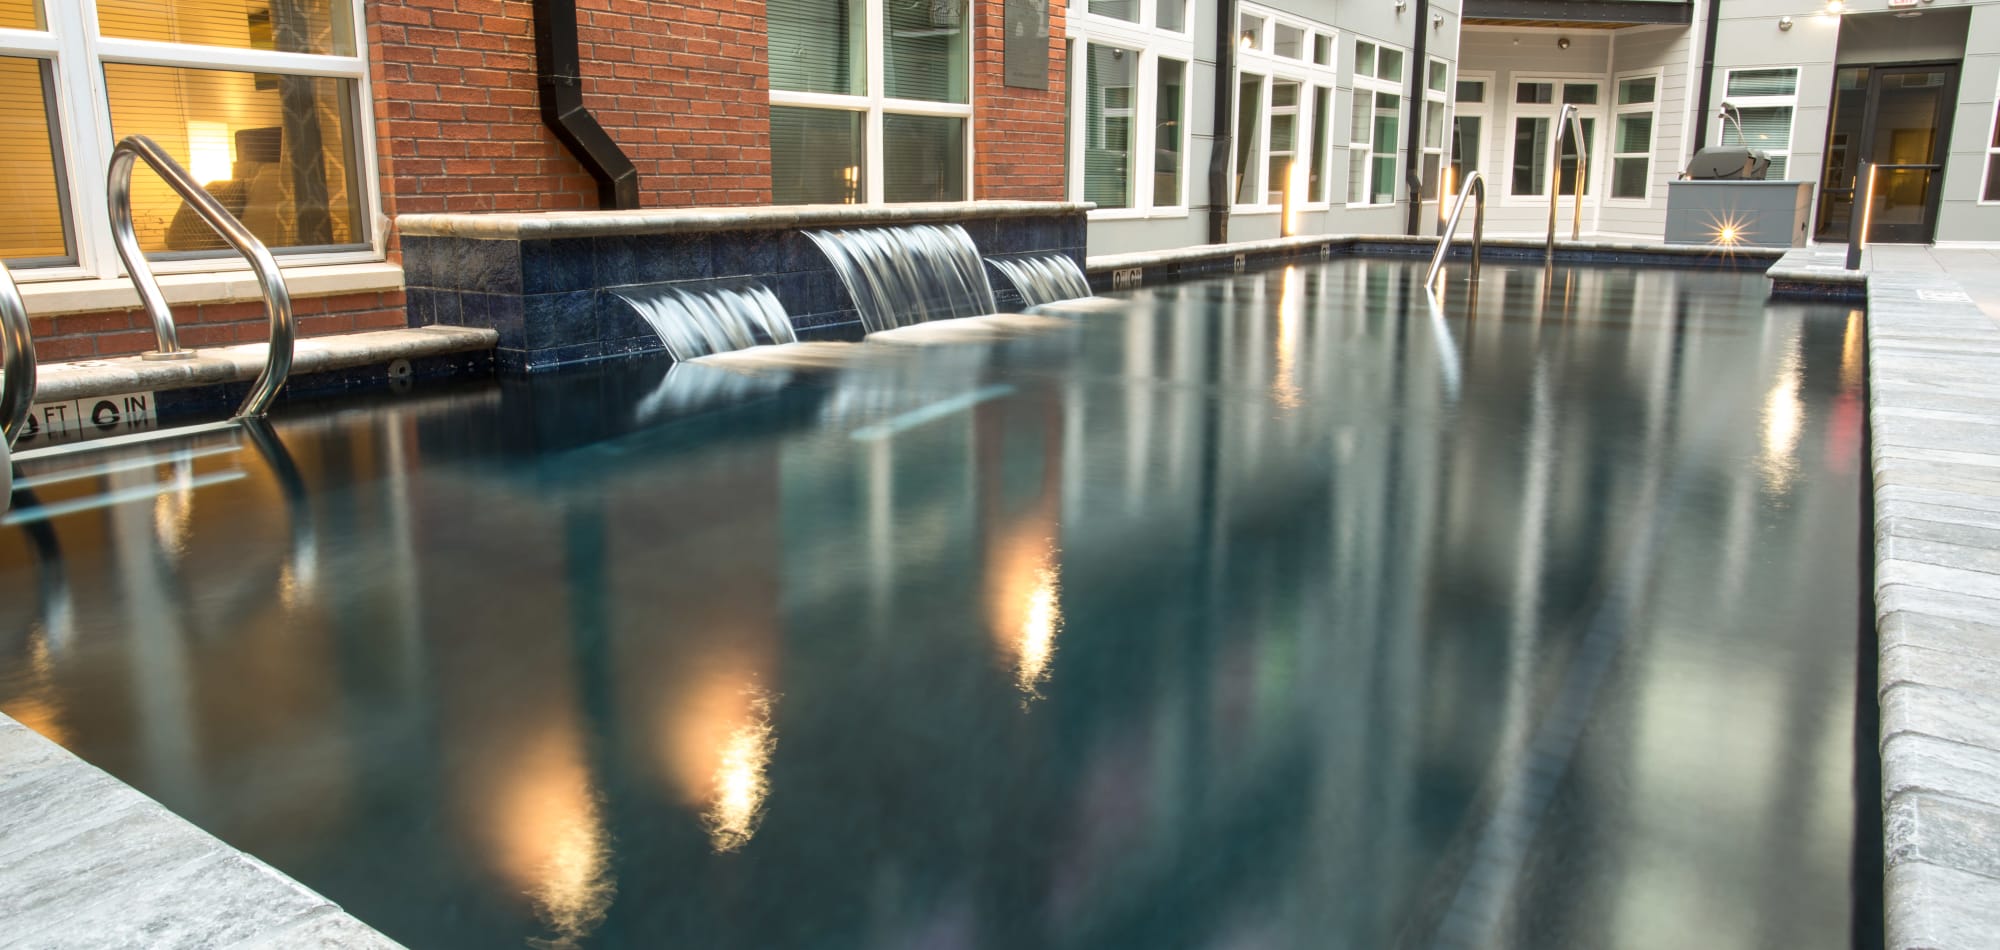 Pool with waterfalls at Attain Downtown, Norfolk, Virginia